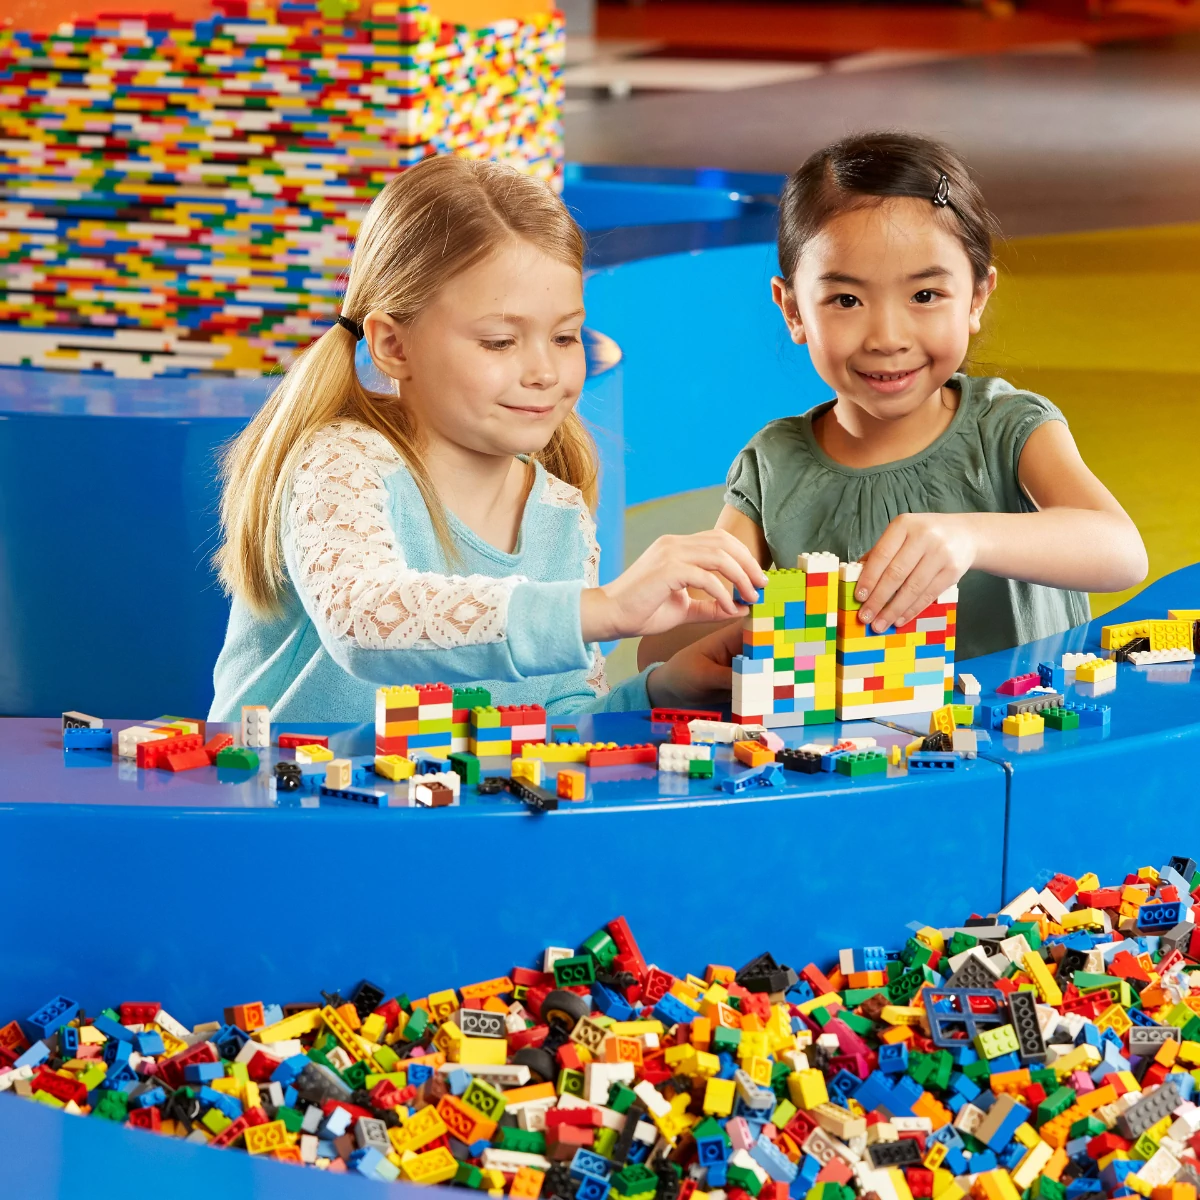 LEGOLAND® Discovery Centre Berlin, two children playing with colorful Lego bricks and smiling